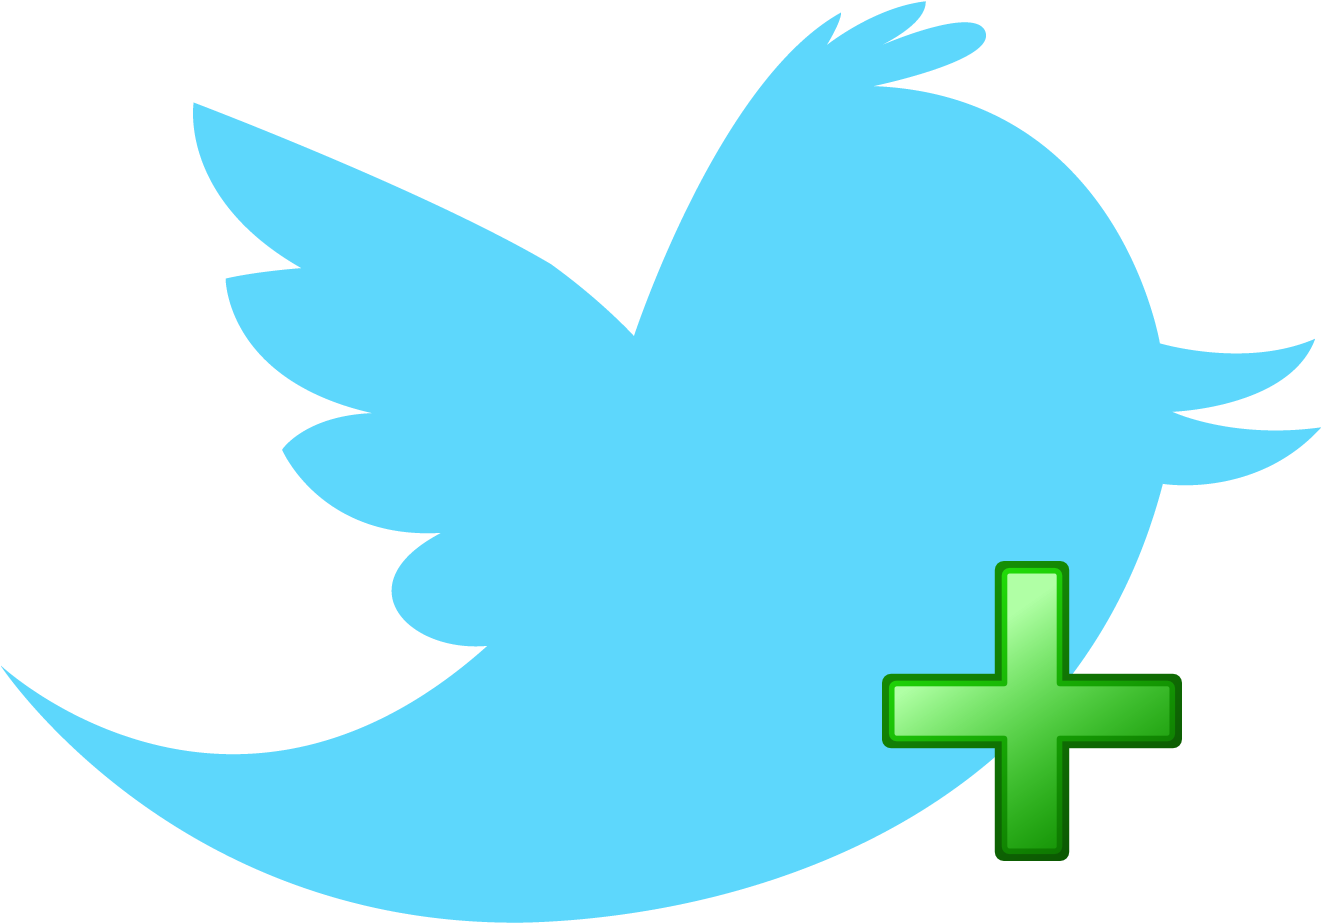 1401403860twitter Logo Plus Sign - Twitter Old Logo Clipart (1920x1080), Png Download